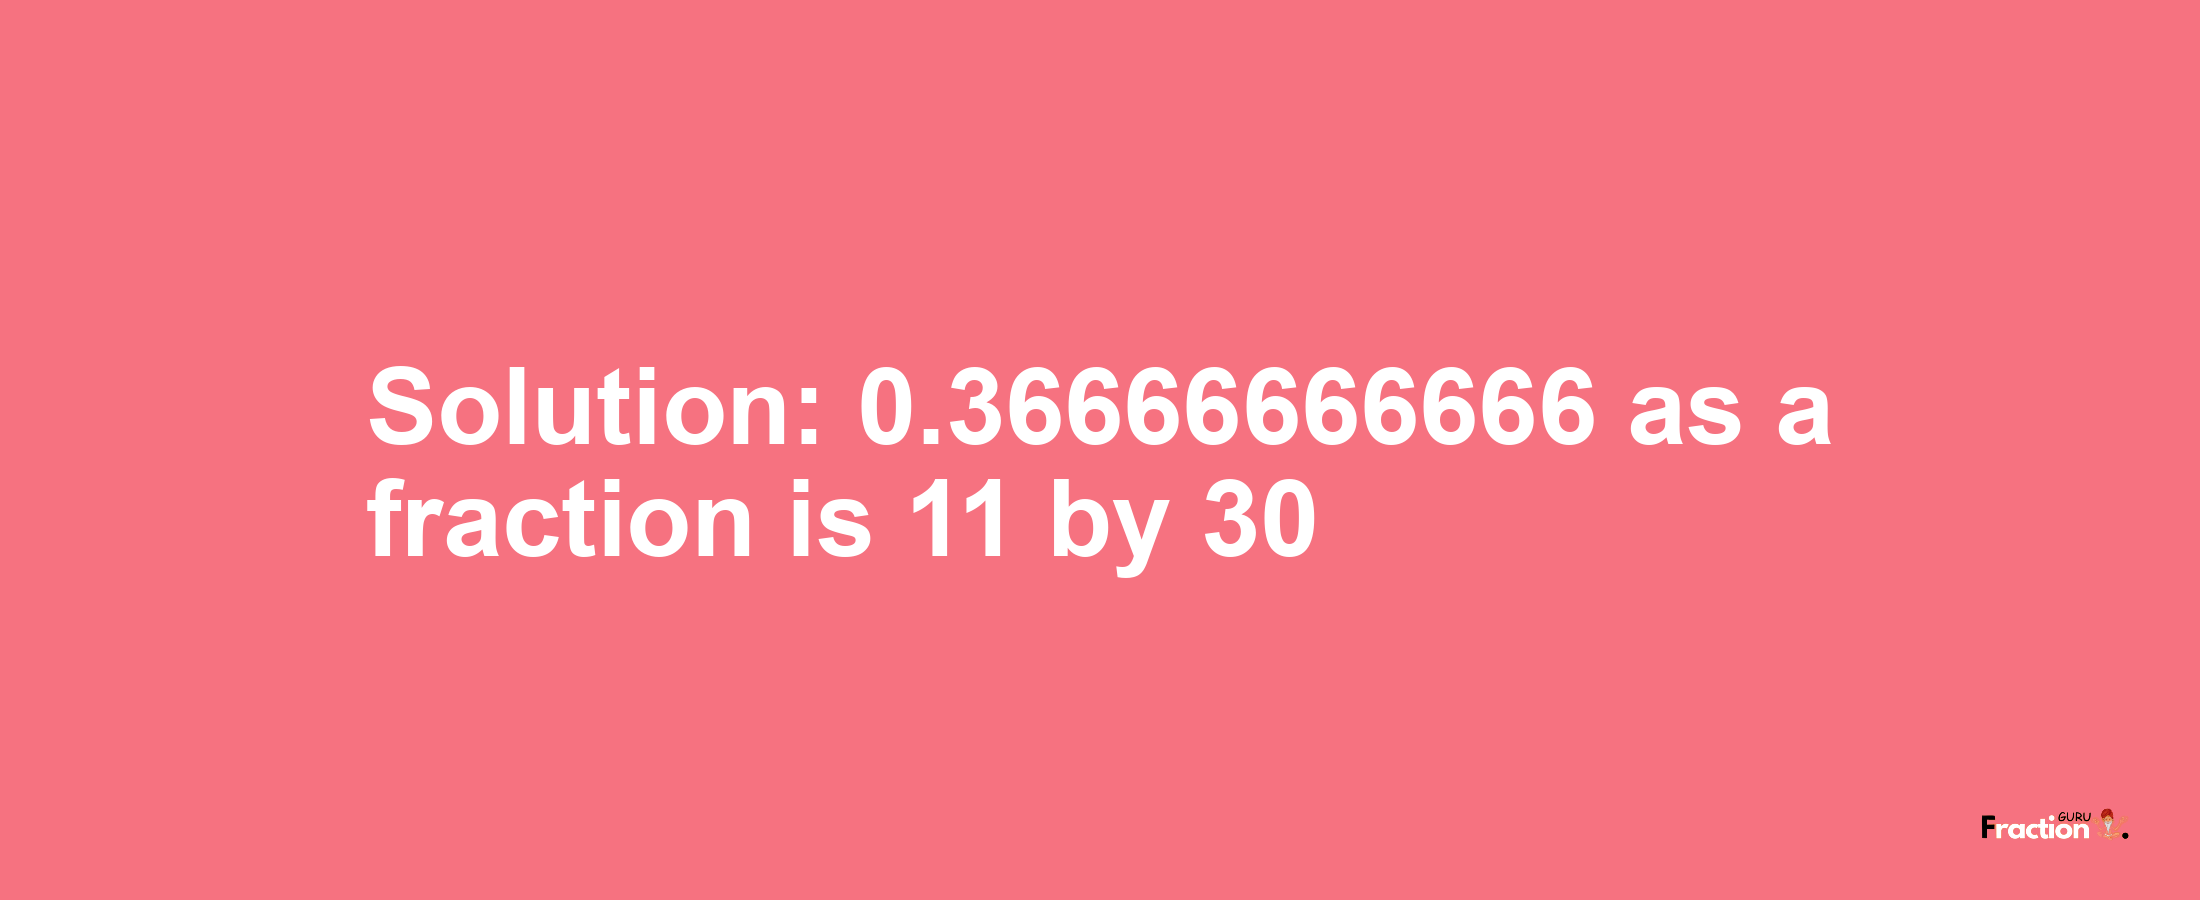 Solution:0.36666666666 as a fraction is 11/30